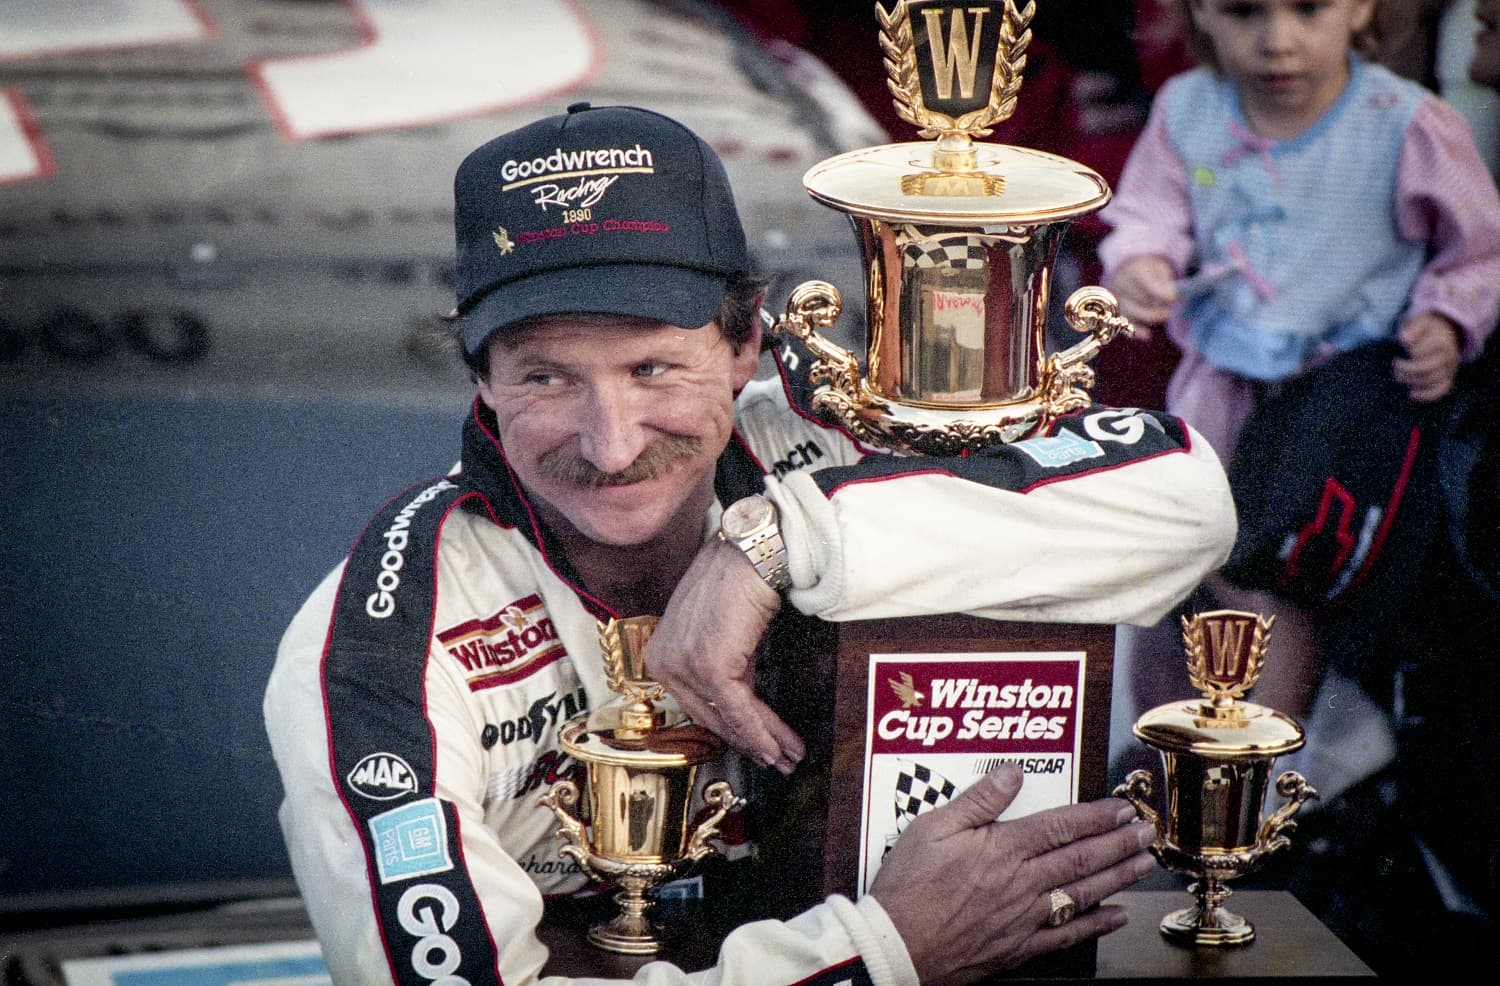 Dale Earnhardt celebrates his fourth NASCAR Cup Series championship after the Atlanta Journal 500 at Atlanta Motor Speedway on Nov. 18, 1990.